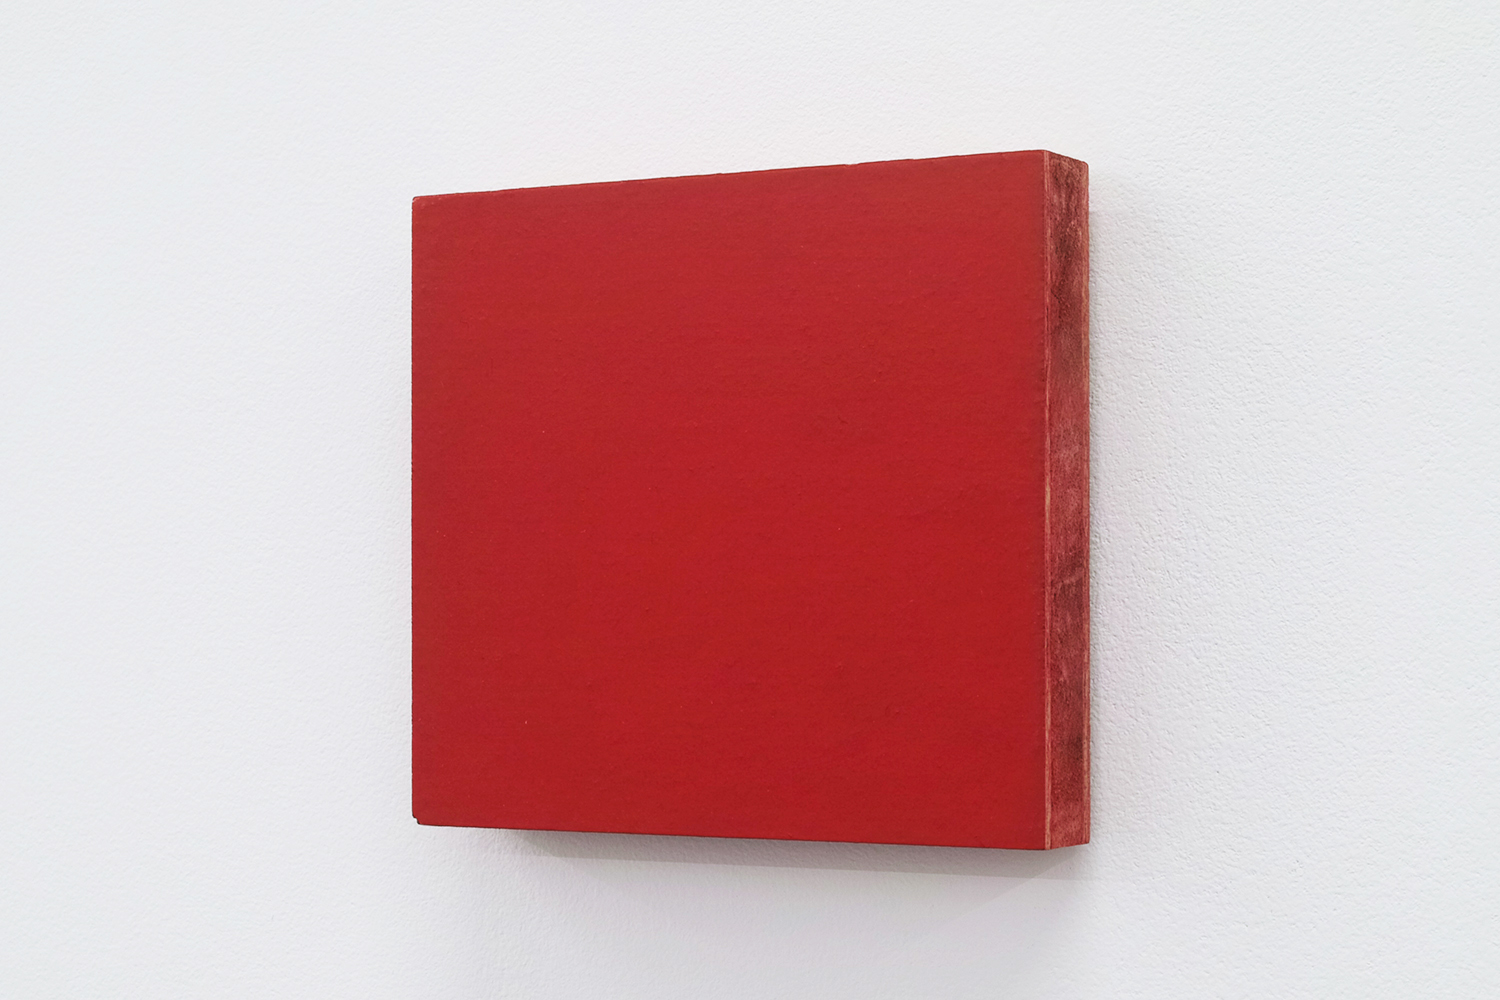 Text No. 445｜pigment, acrylic on plywood｜92 x 100 x 20 mm｜2004<br>¥50,000 - 150,000